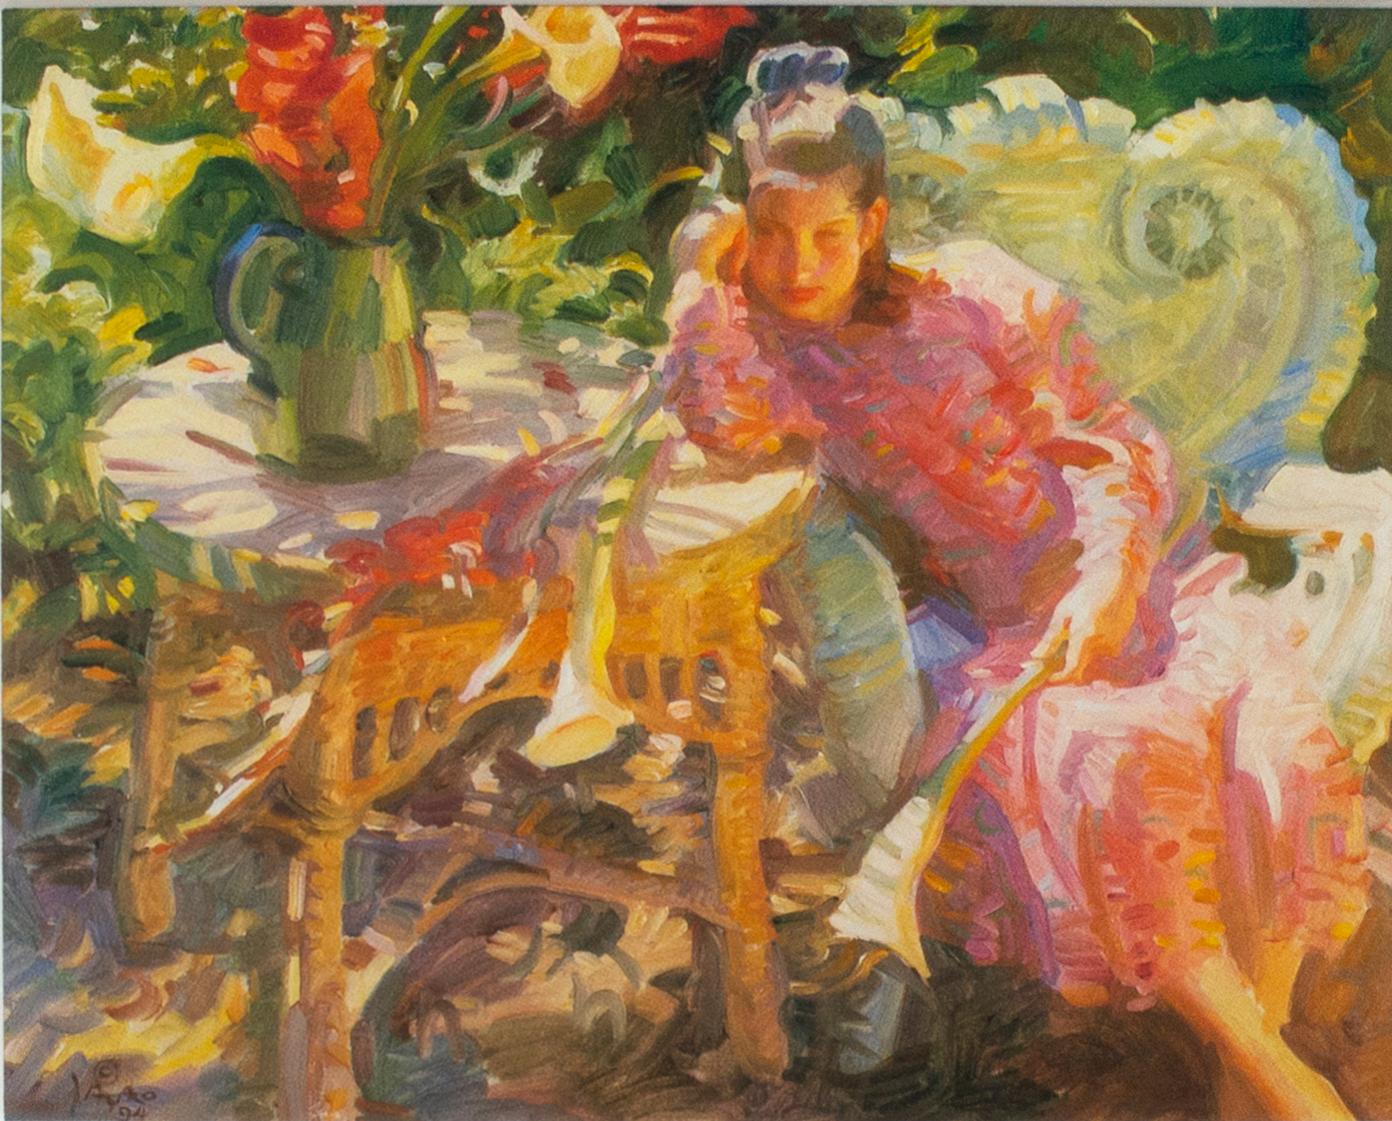 'Daydream' offset lithograph from the oil painting girl with wicker furniture - Print by John Asaro